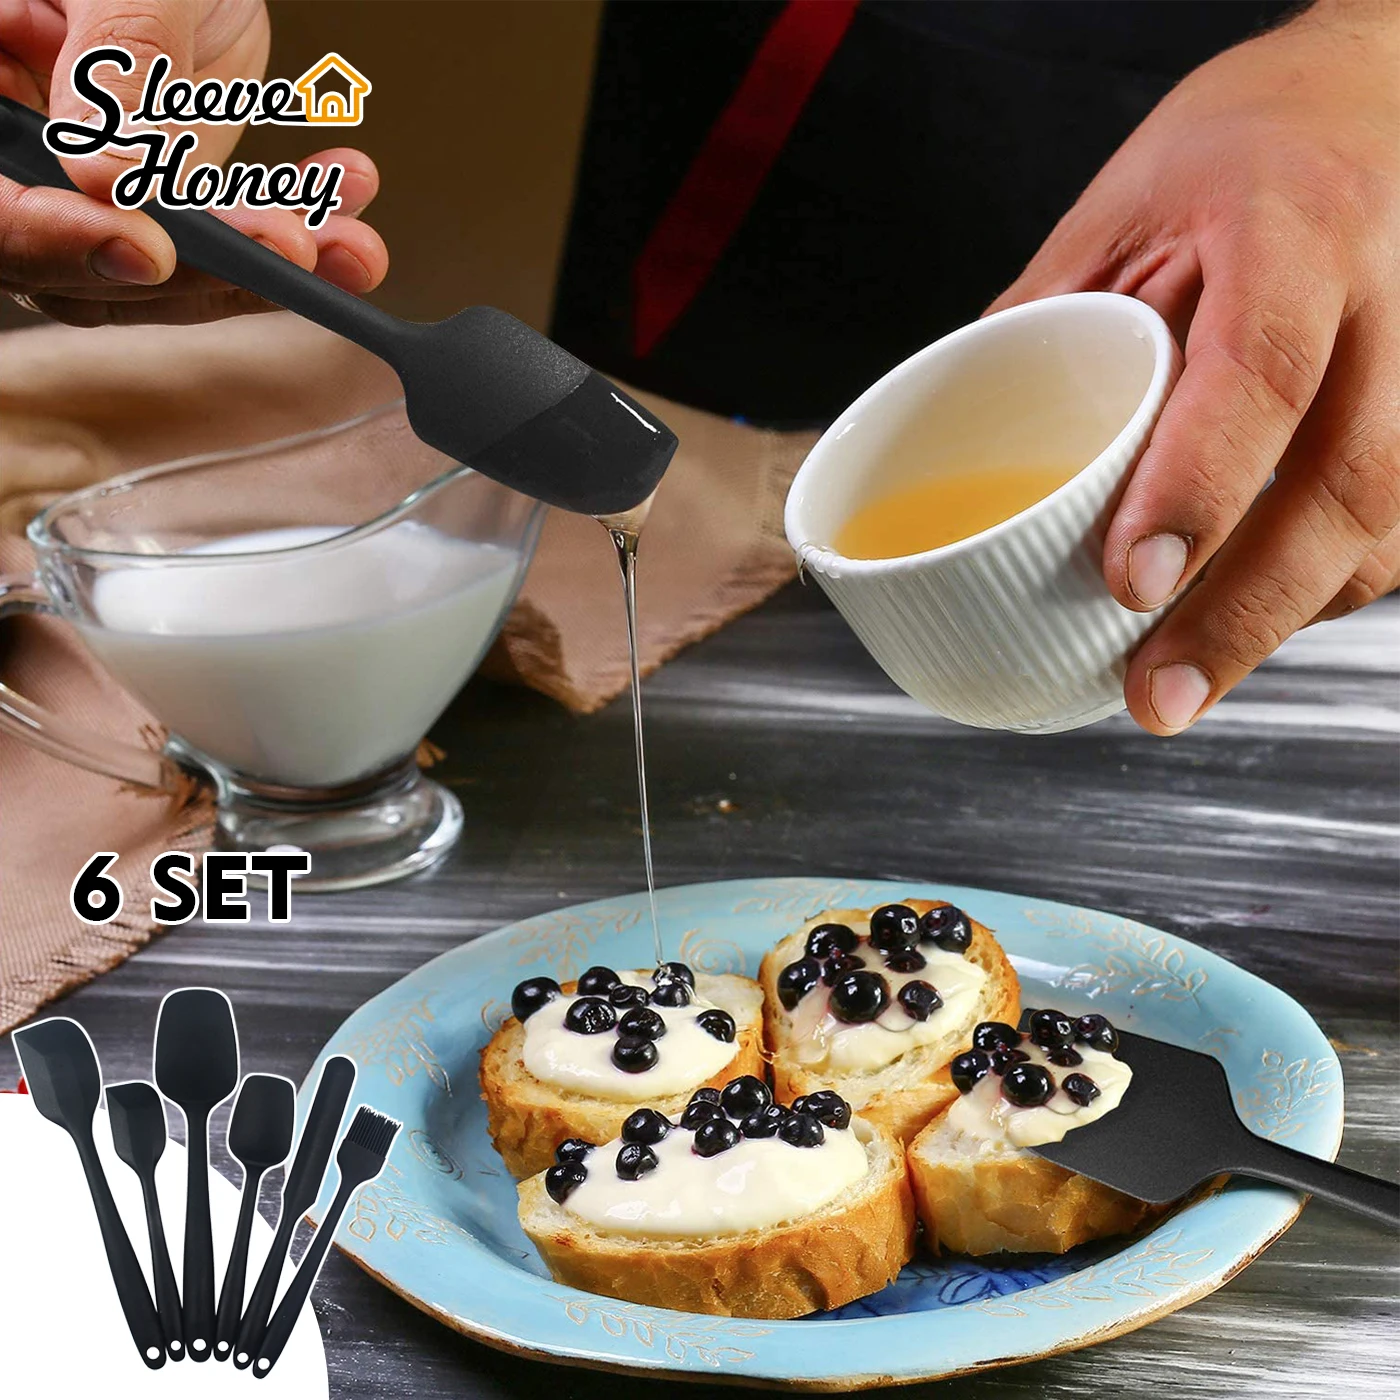 

6pcs Baking Tools Silicone Spatula Set Non-Stick Butter Cooking Cake Bakeware And Mixing High Heat Resistant Kitchen Utensils